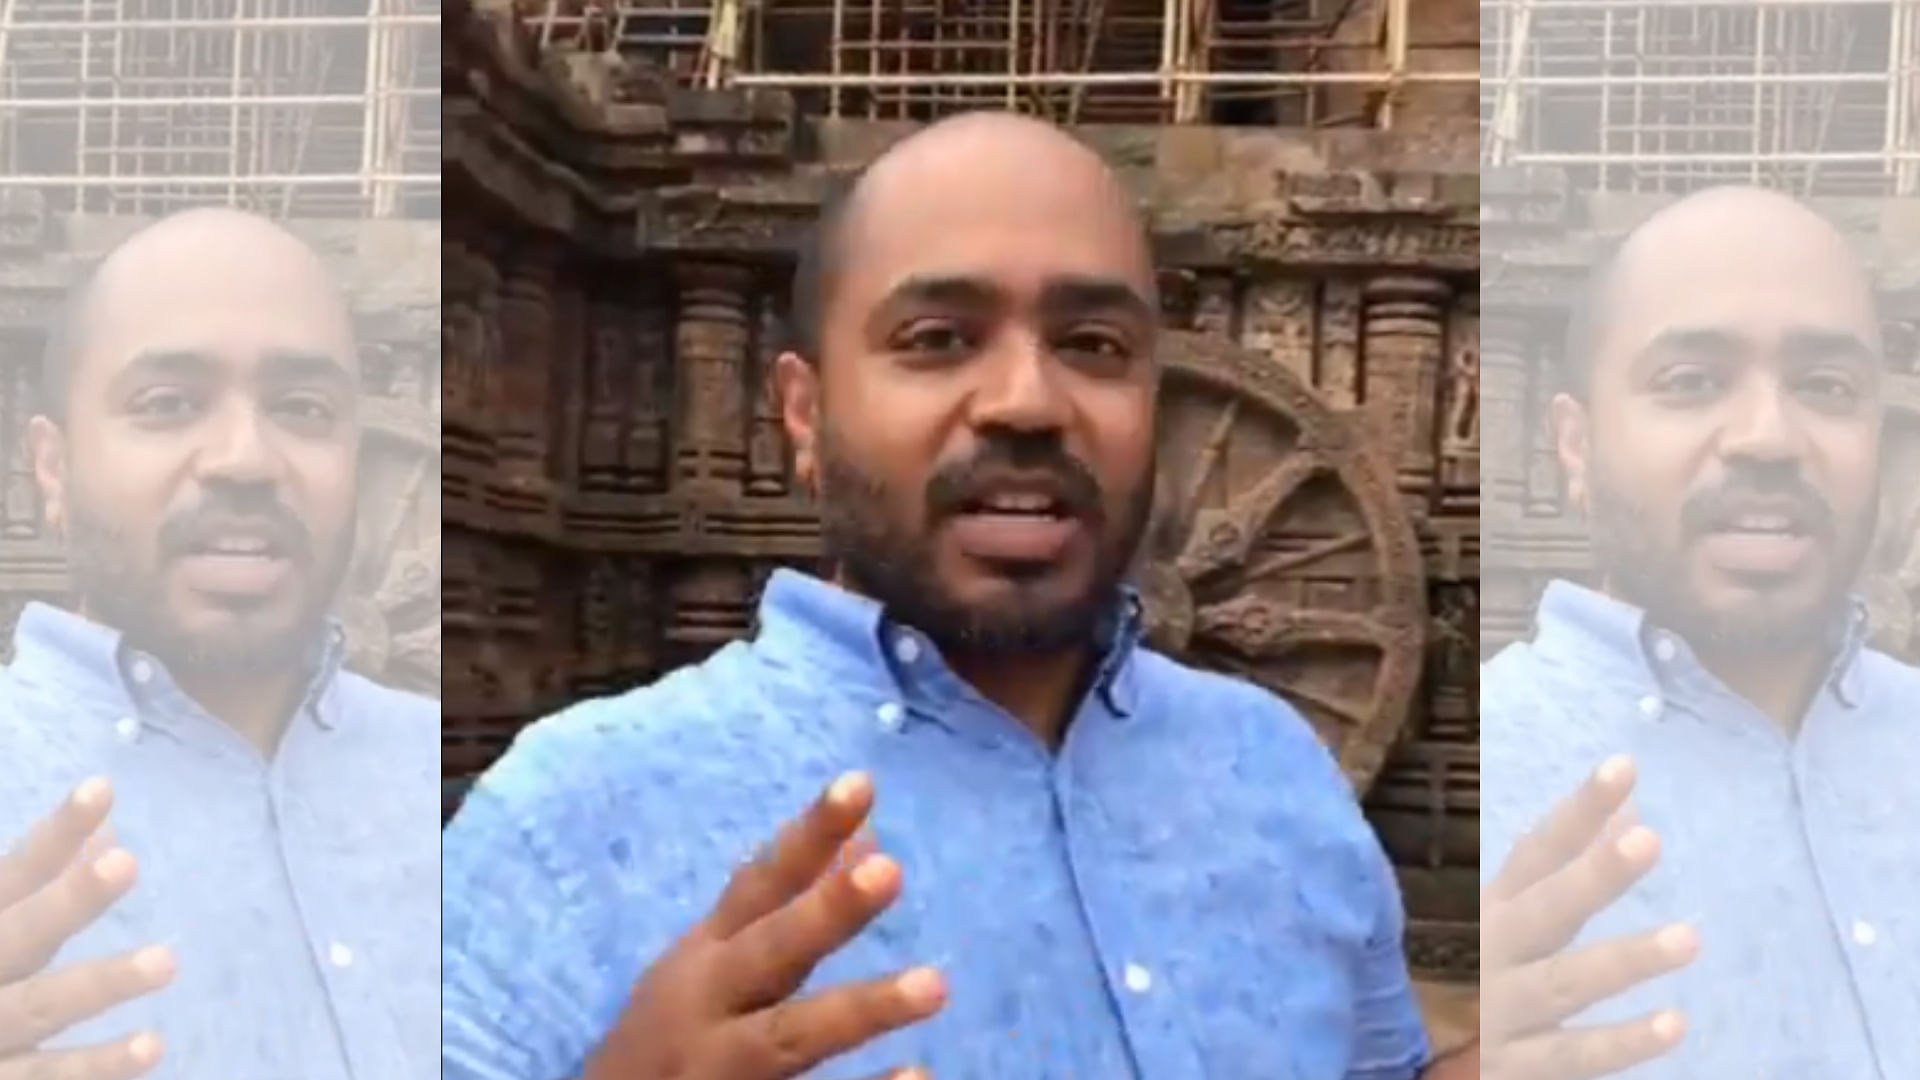 Security analyst Abhijit Iyer-Mitra was arrested by the Delhi police on Thursday, 20 September, for allegedly making derogatory remarks on the Sun Temple at Konark in Odisha.